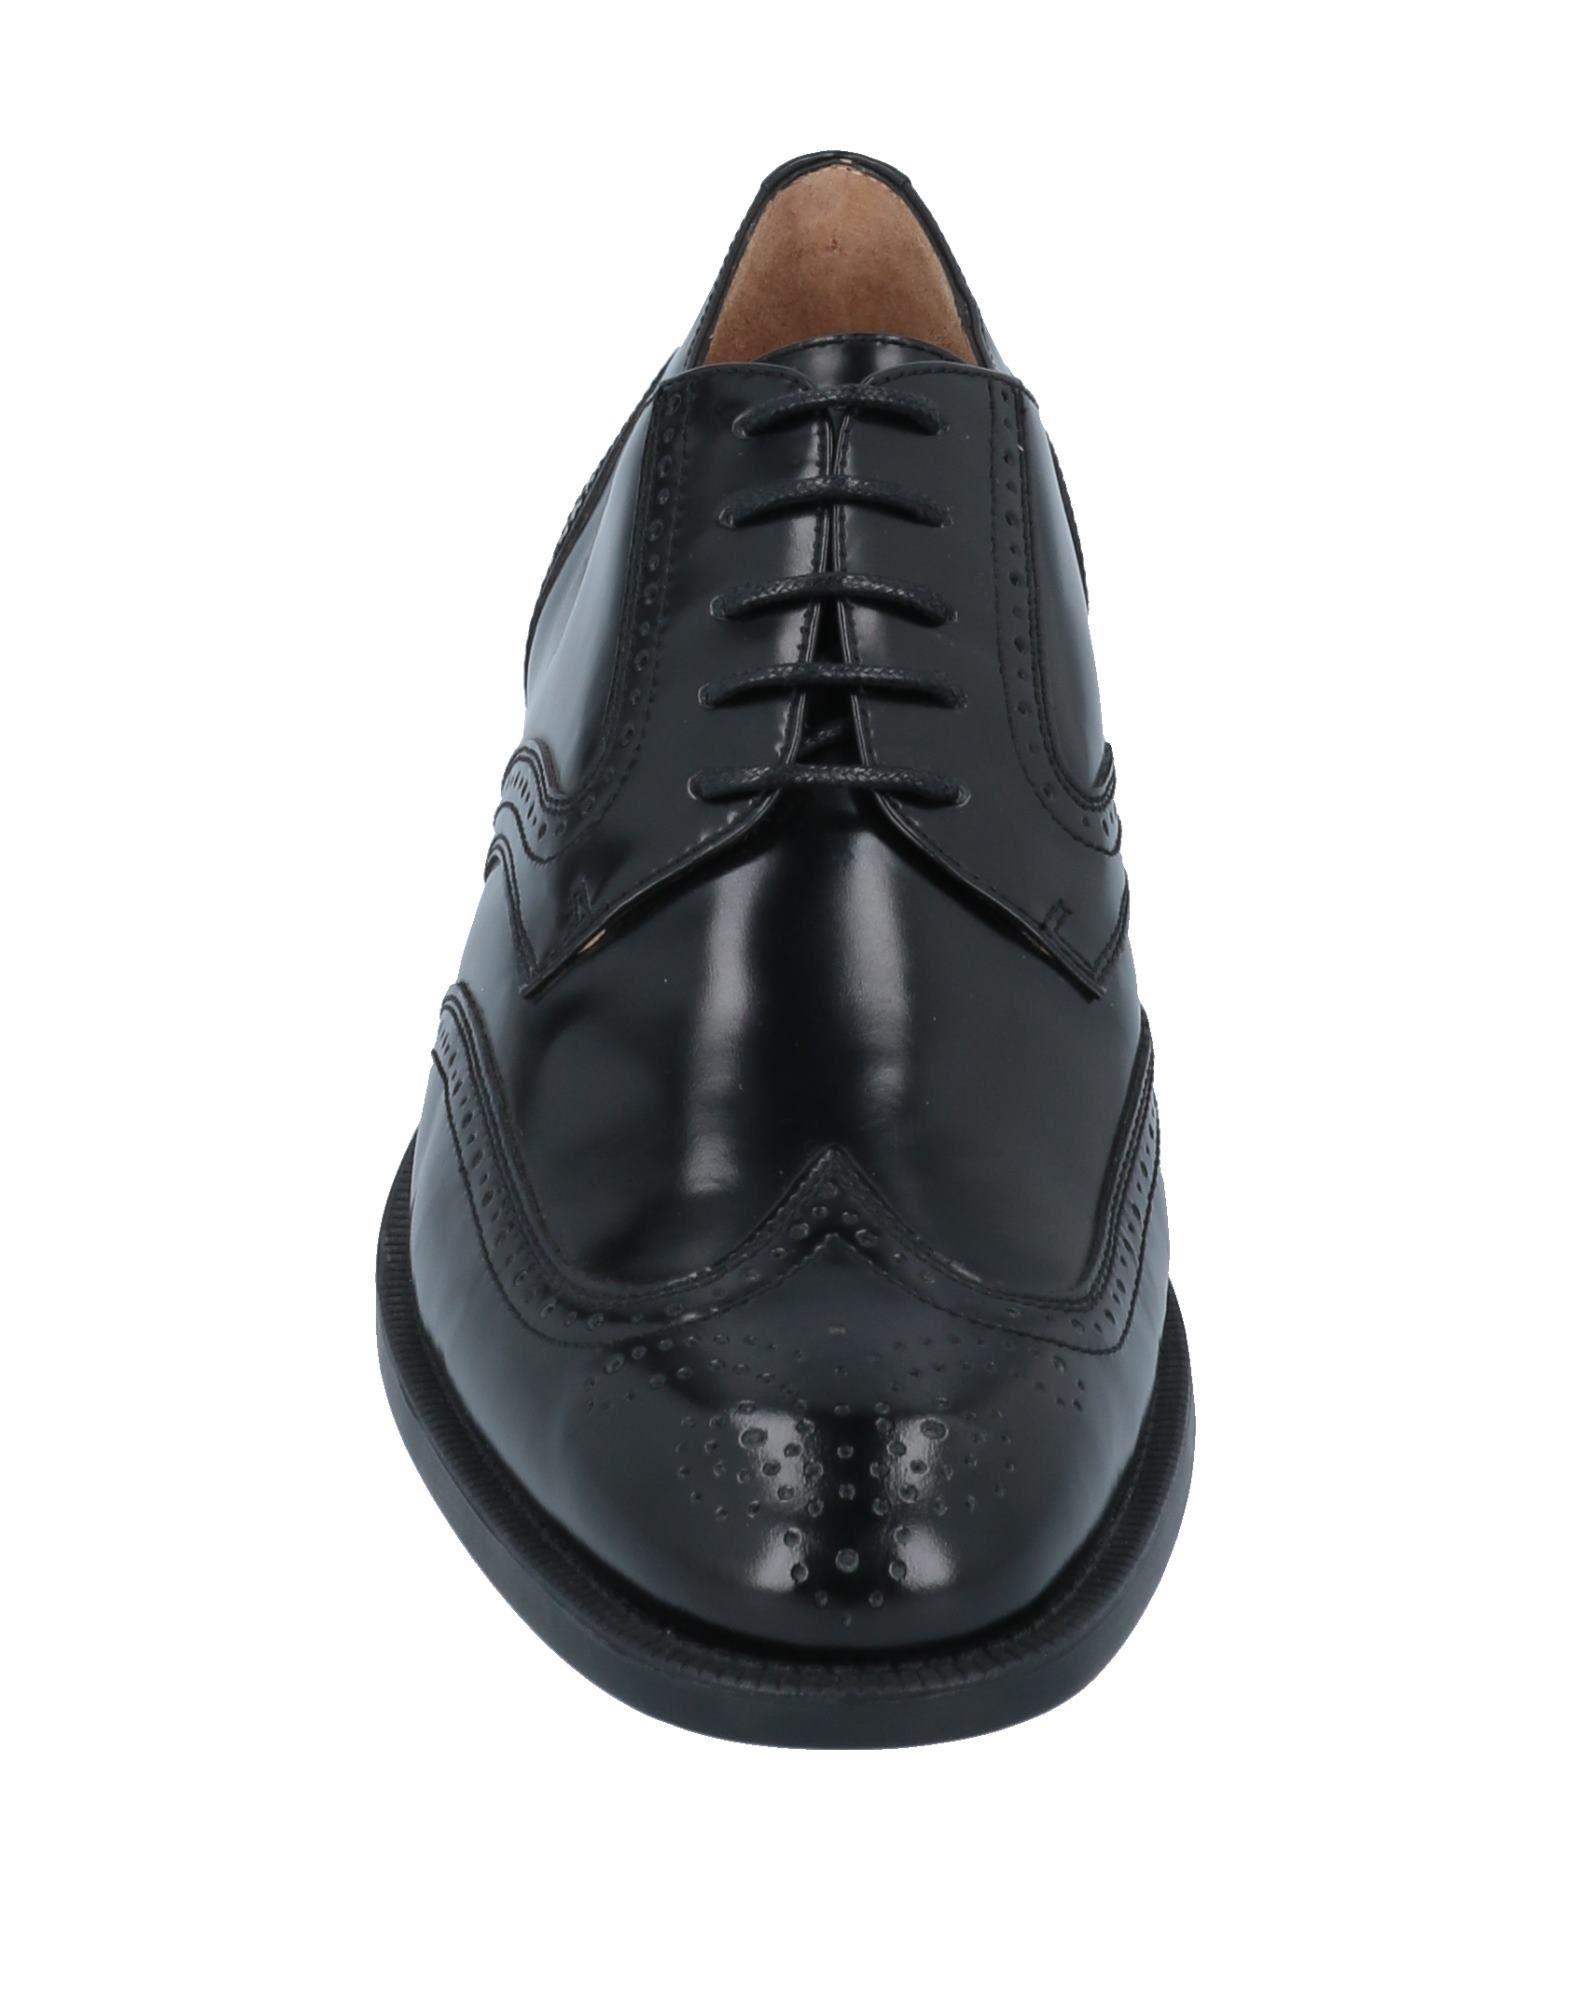 Stonefly Leather Lace-up Shoe in Black for Men - Lyst